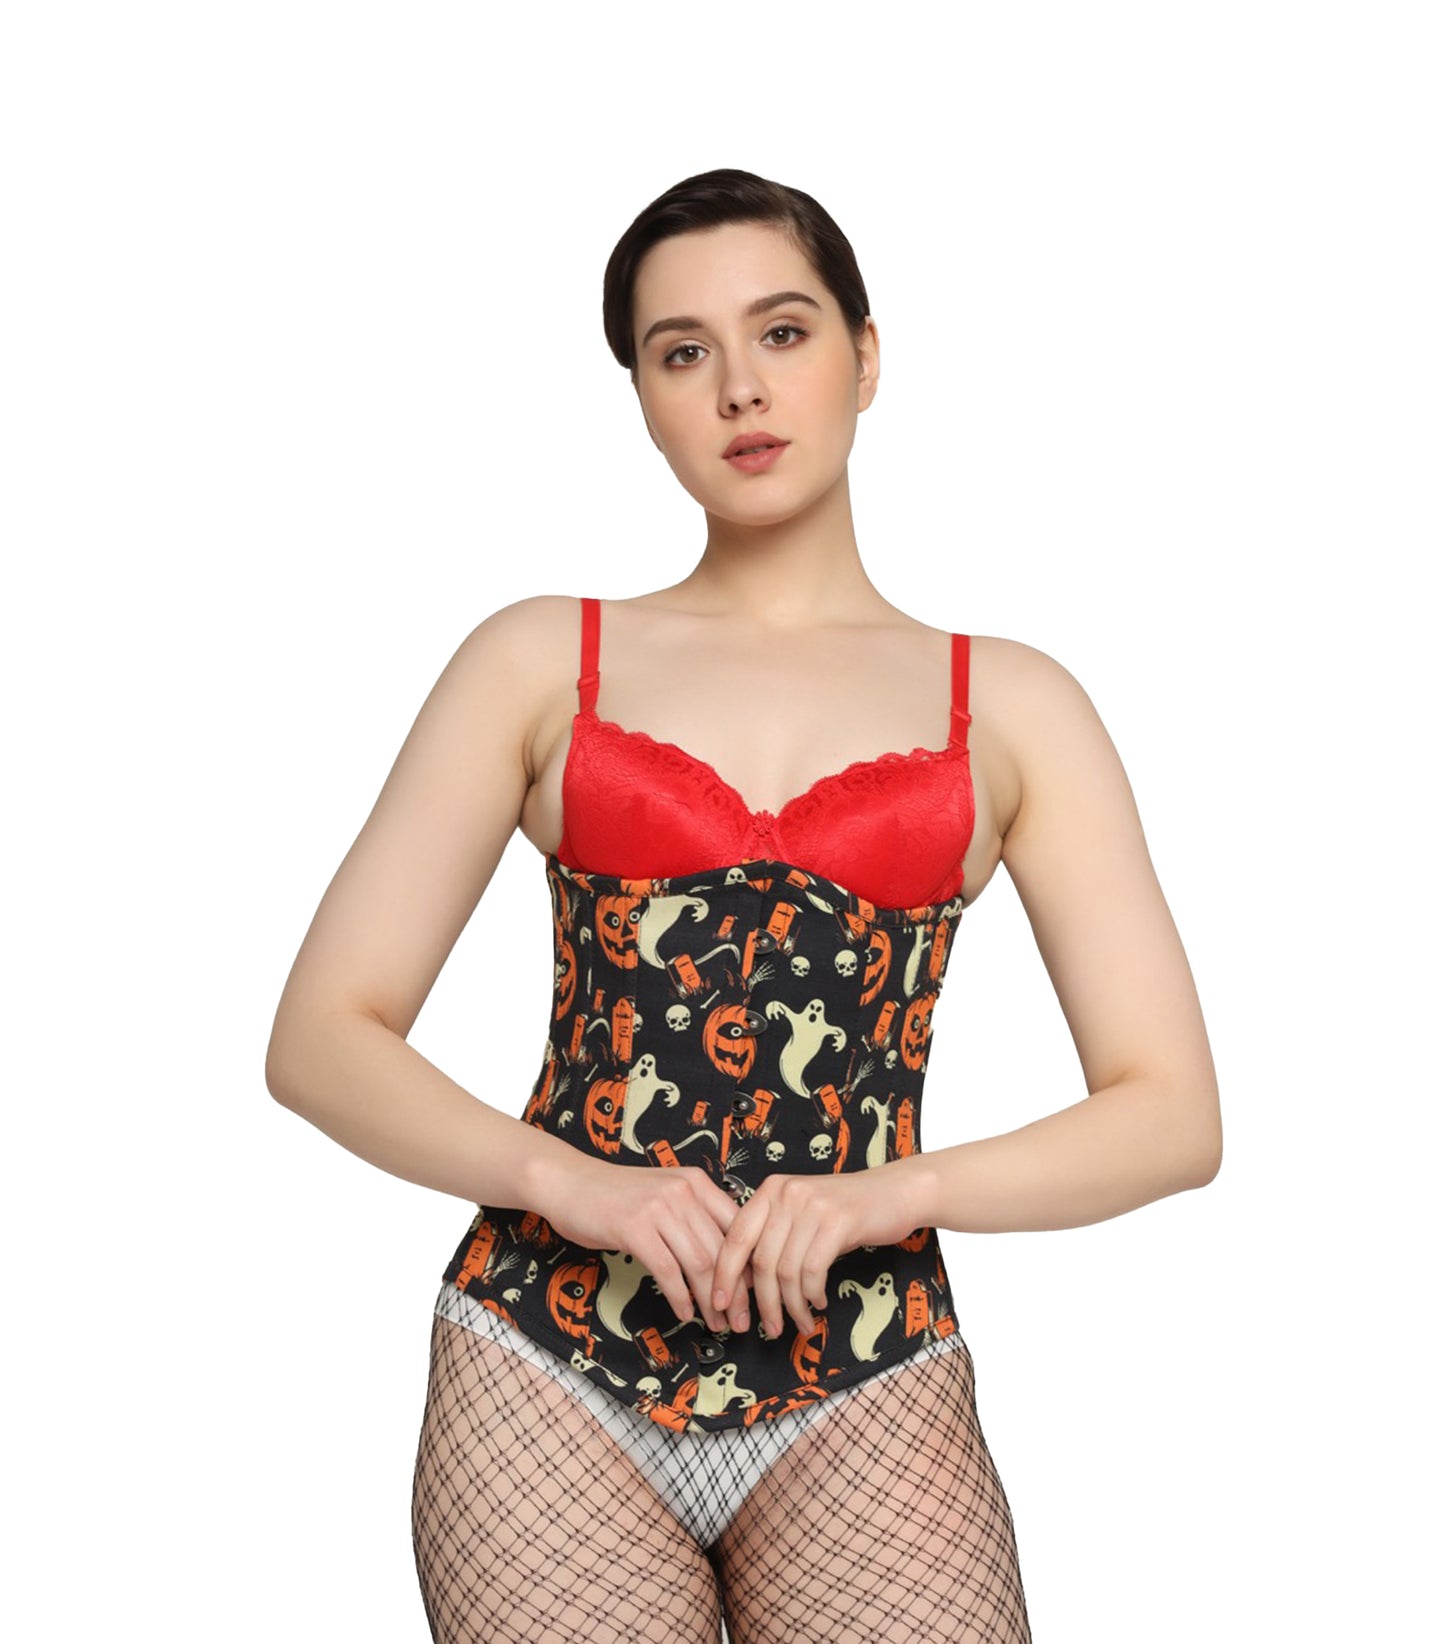 Houndstooth printed waist reducing longlined underbust corset